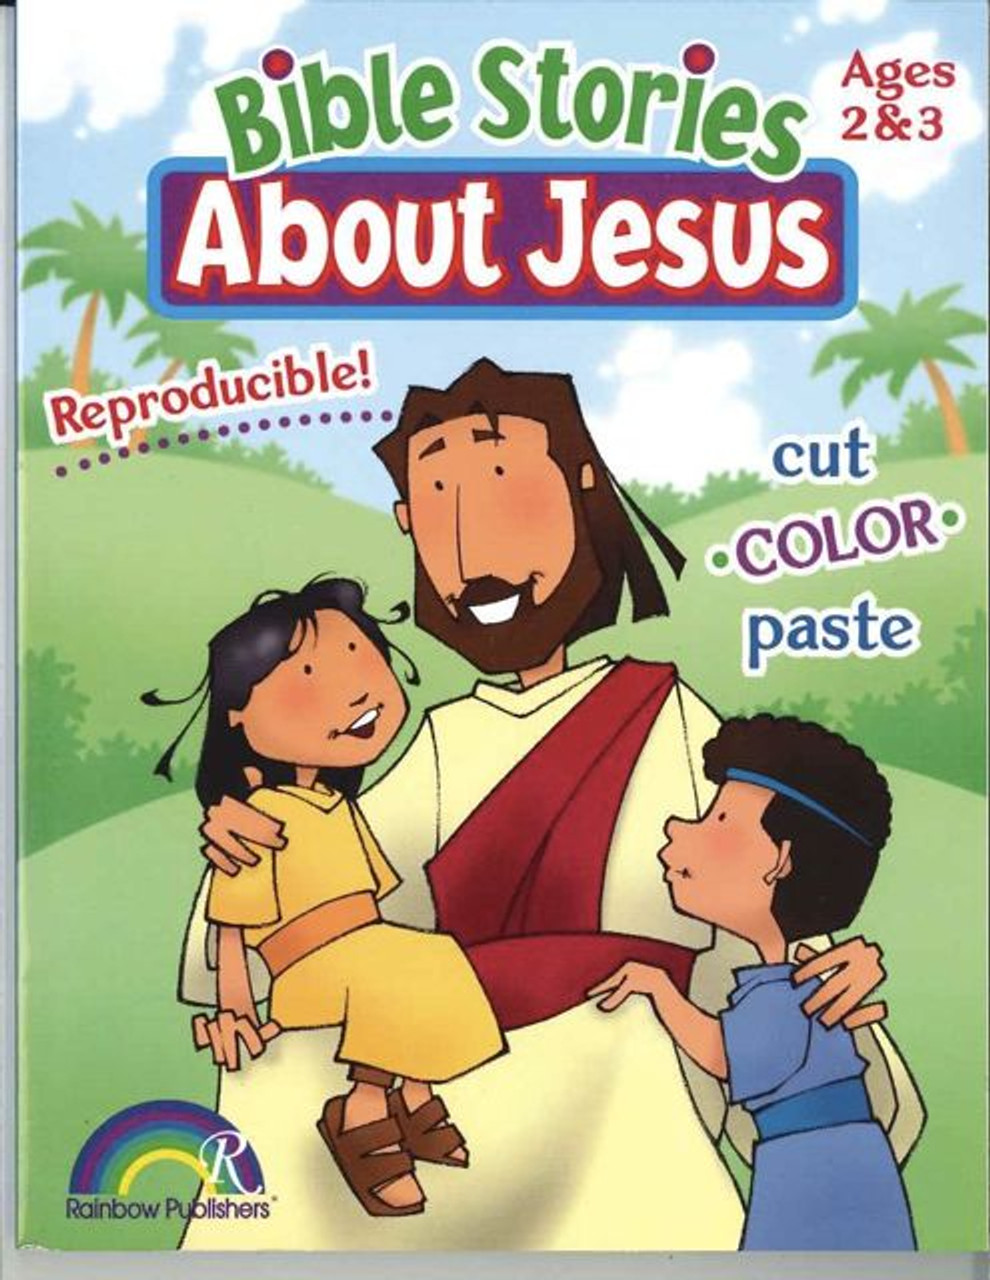 Bible Stories About Jesus - Ages 2-3